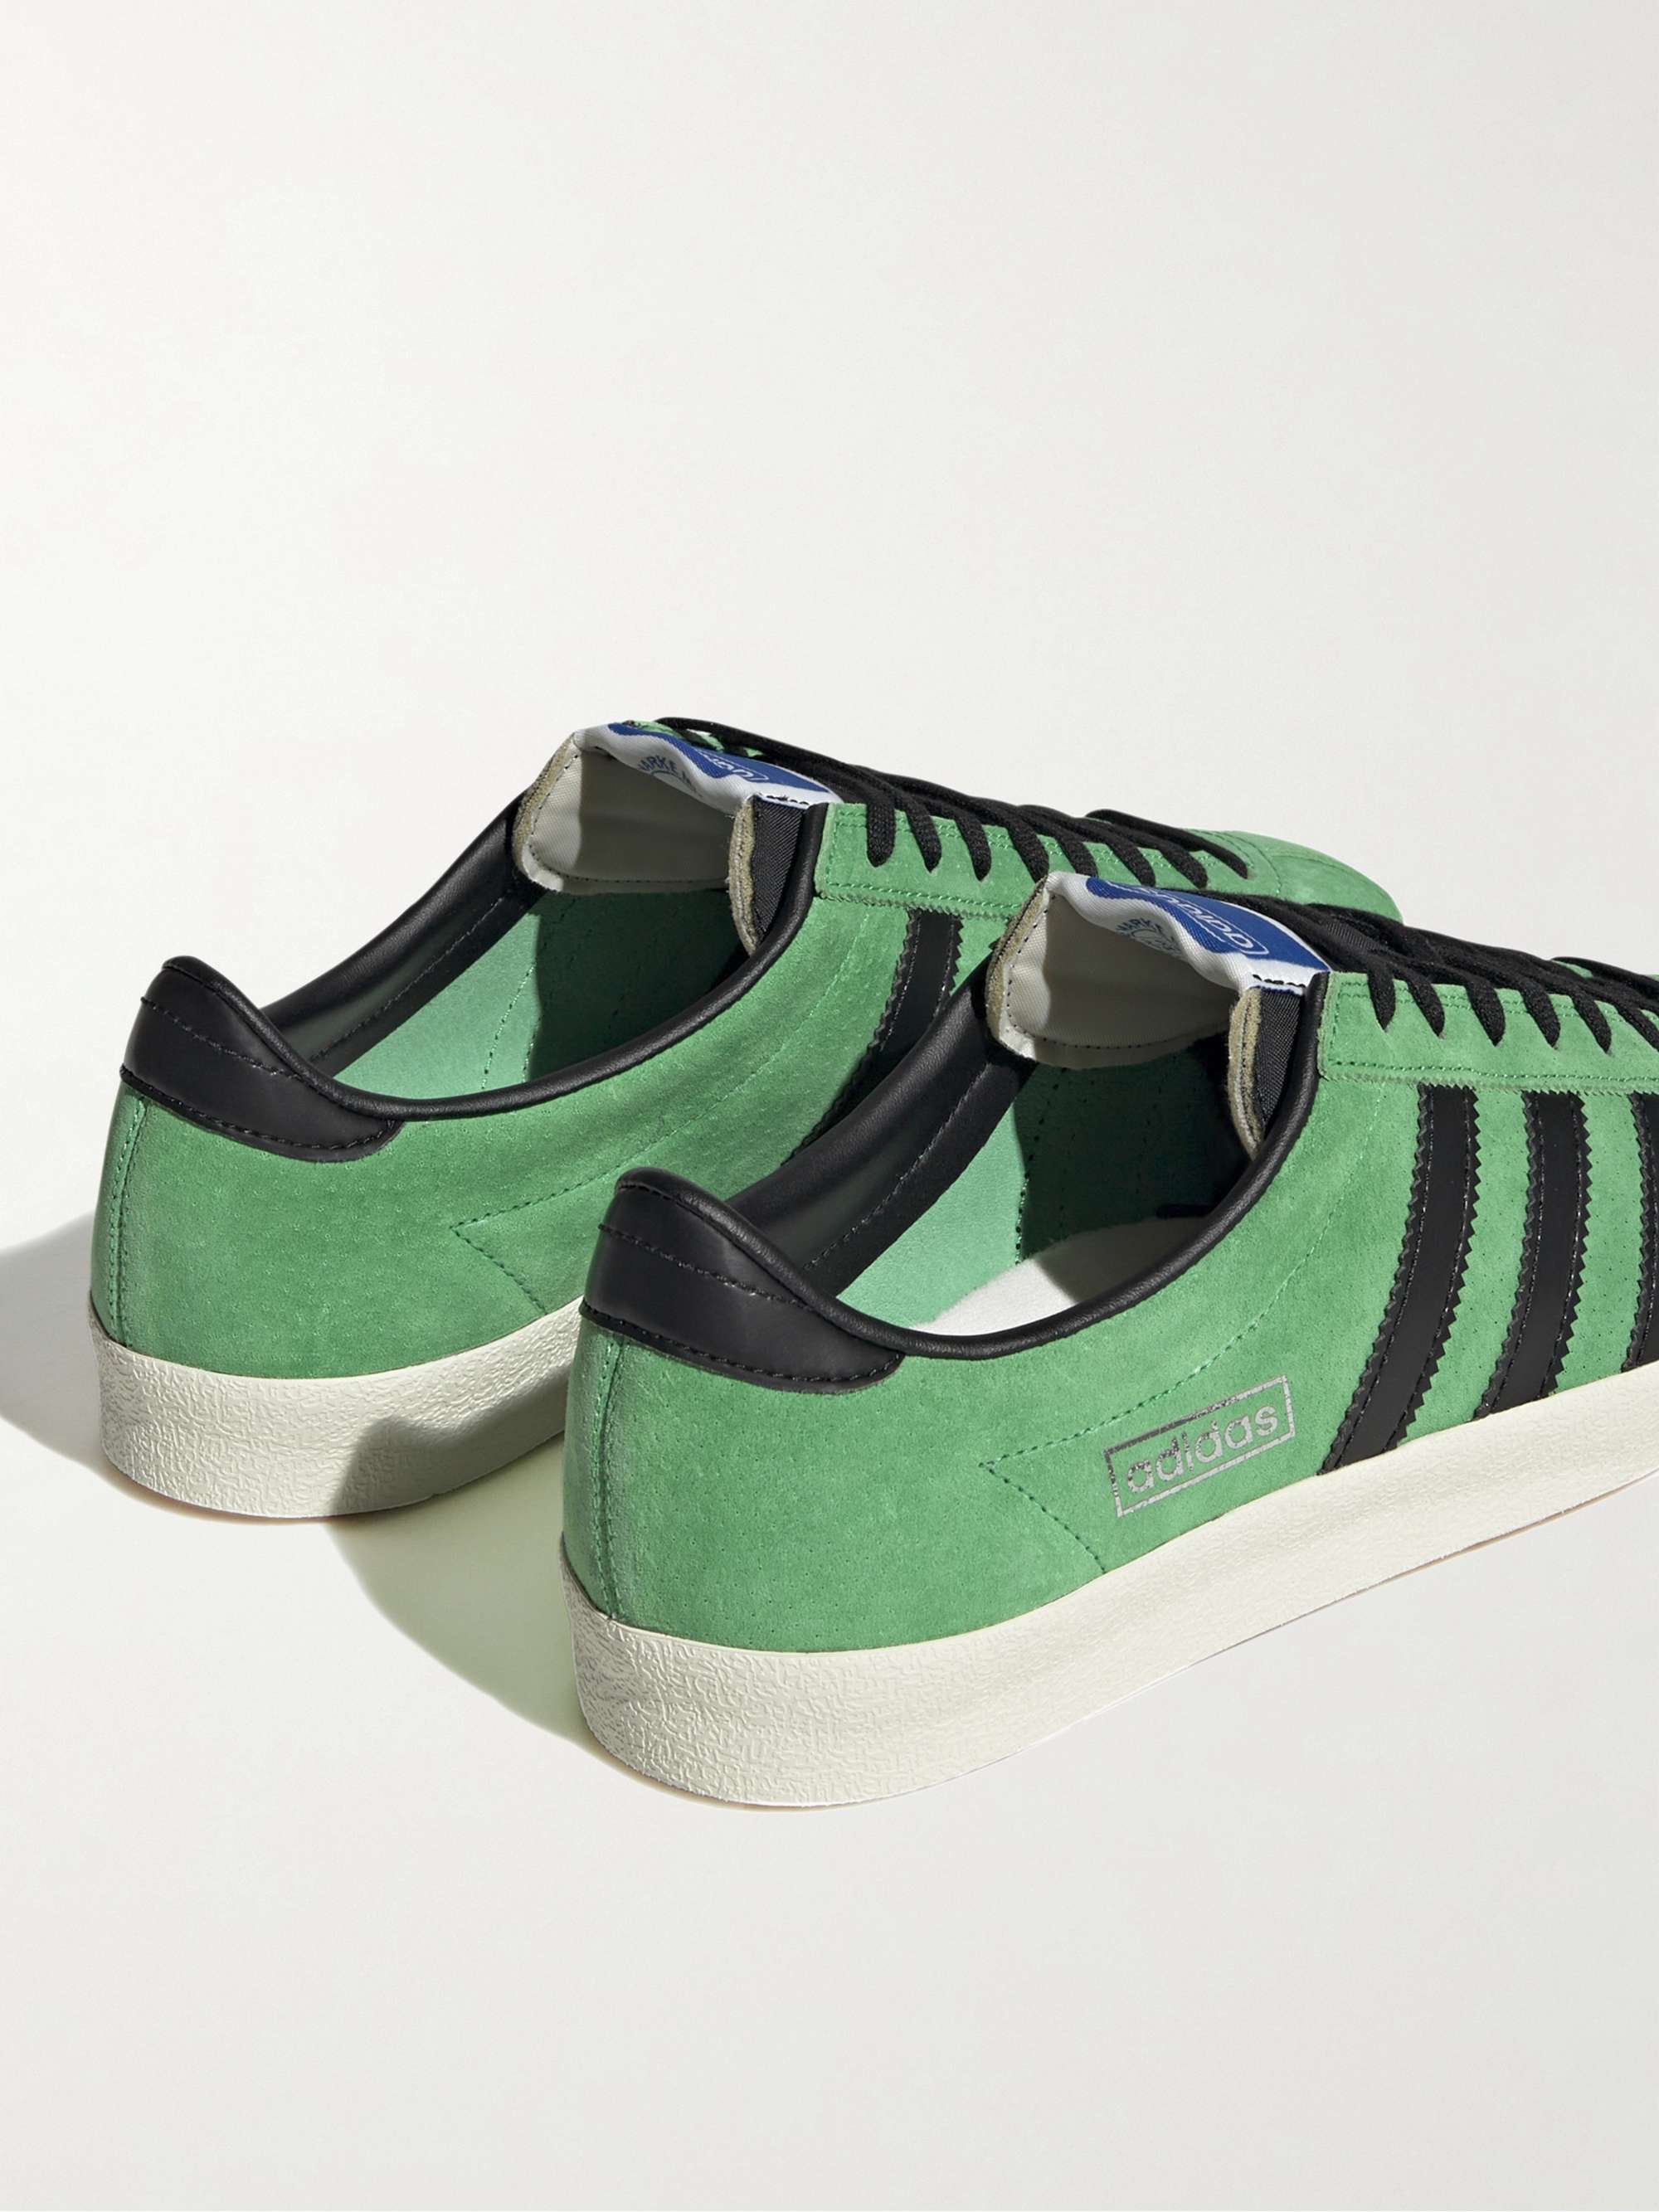 ADIDAS ORIGINALS Mexicana Leather-Trimmed Suede Sneakers | MR PORTER